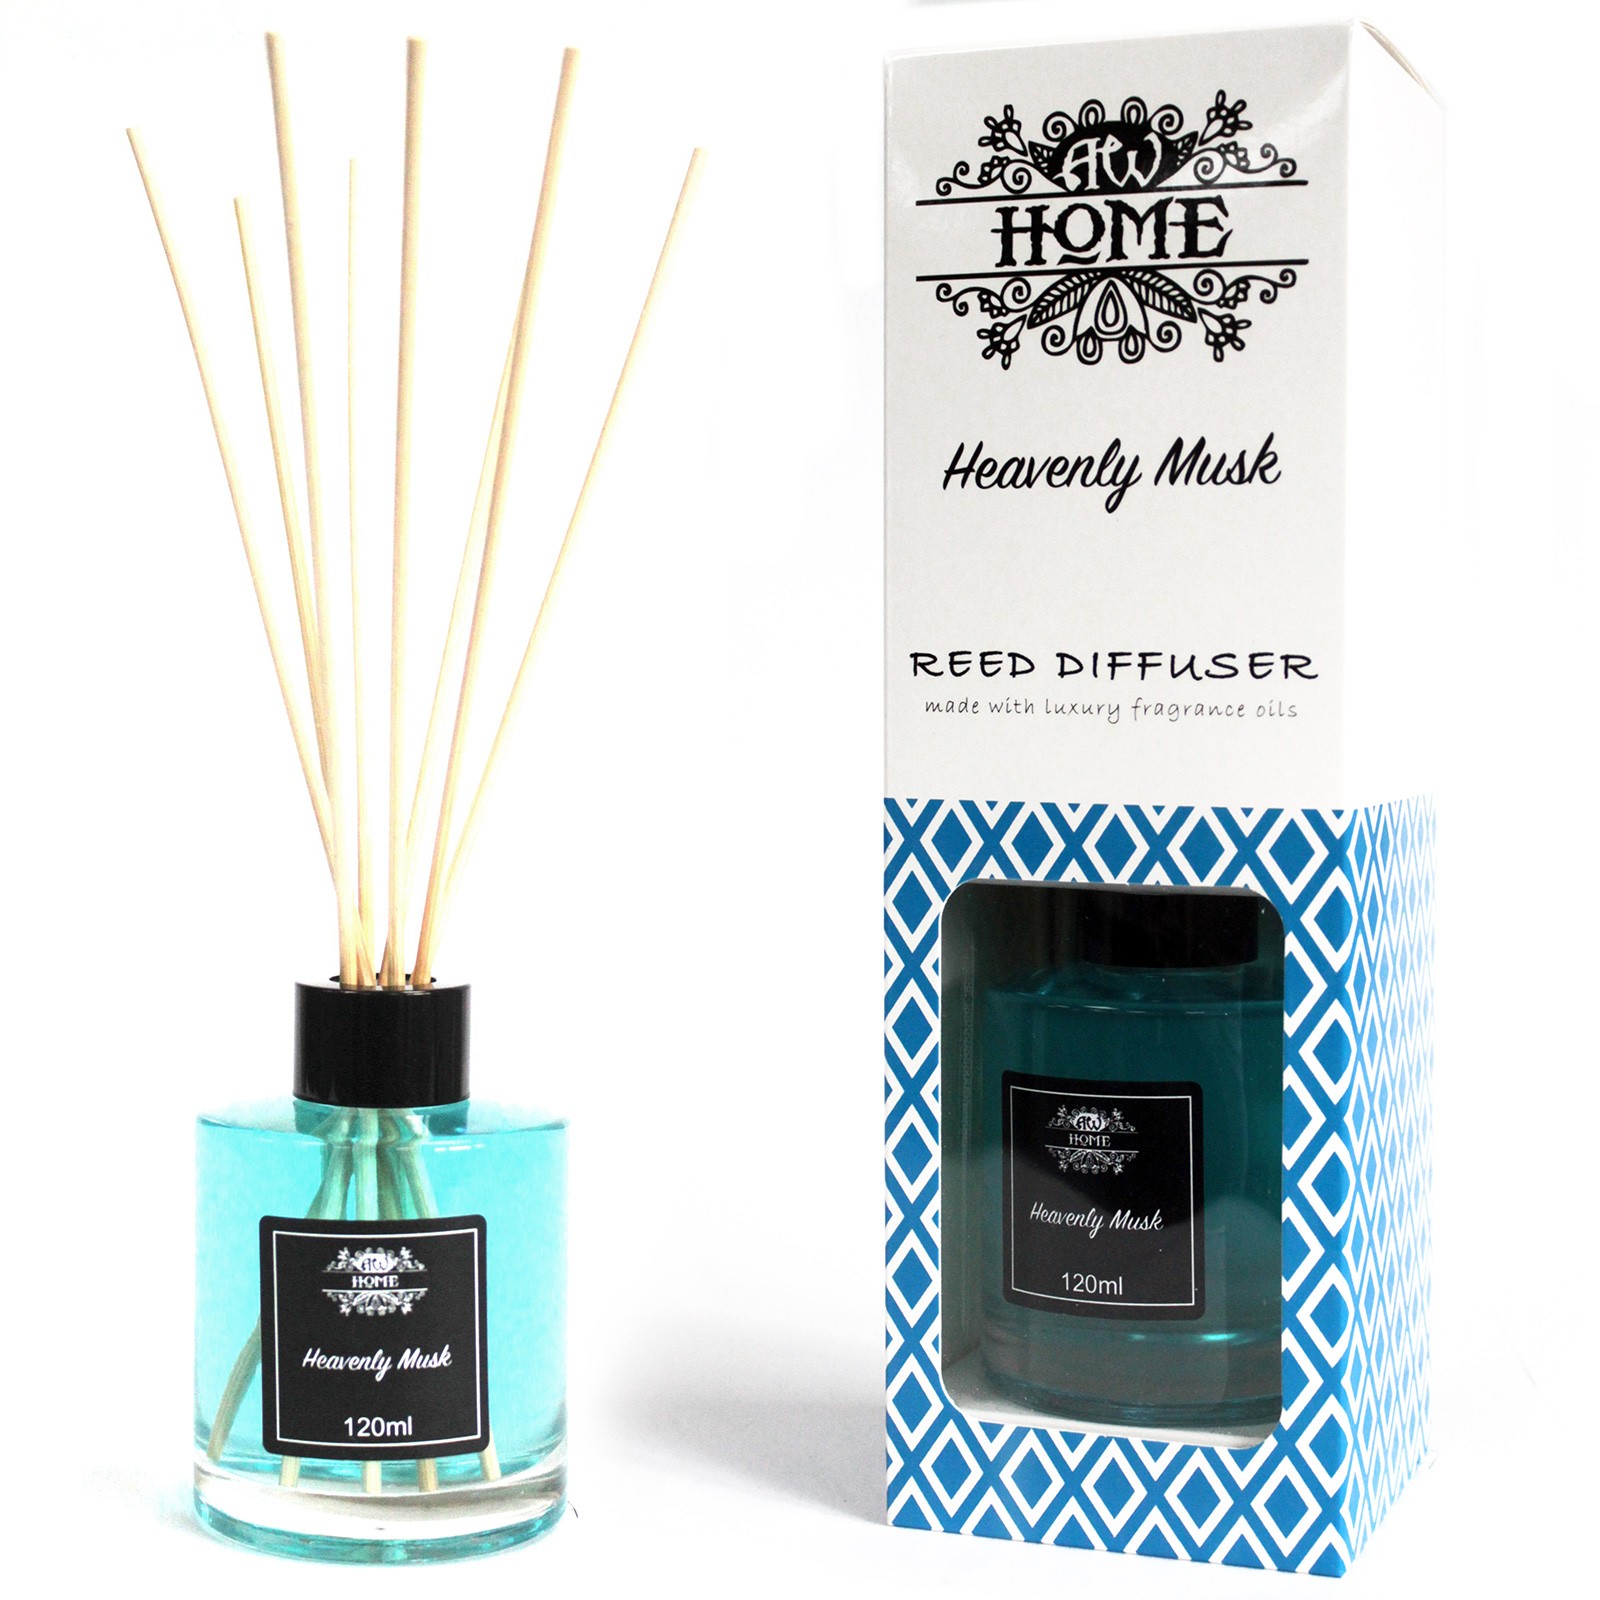 Heavenly Musk - 120ml Reed Diffuser